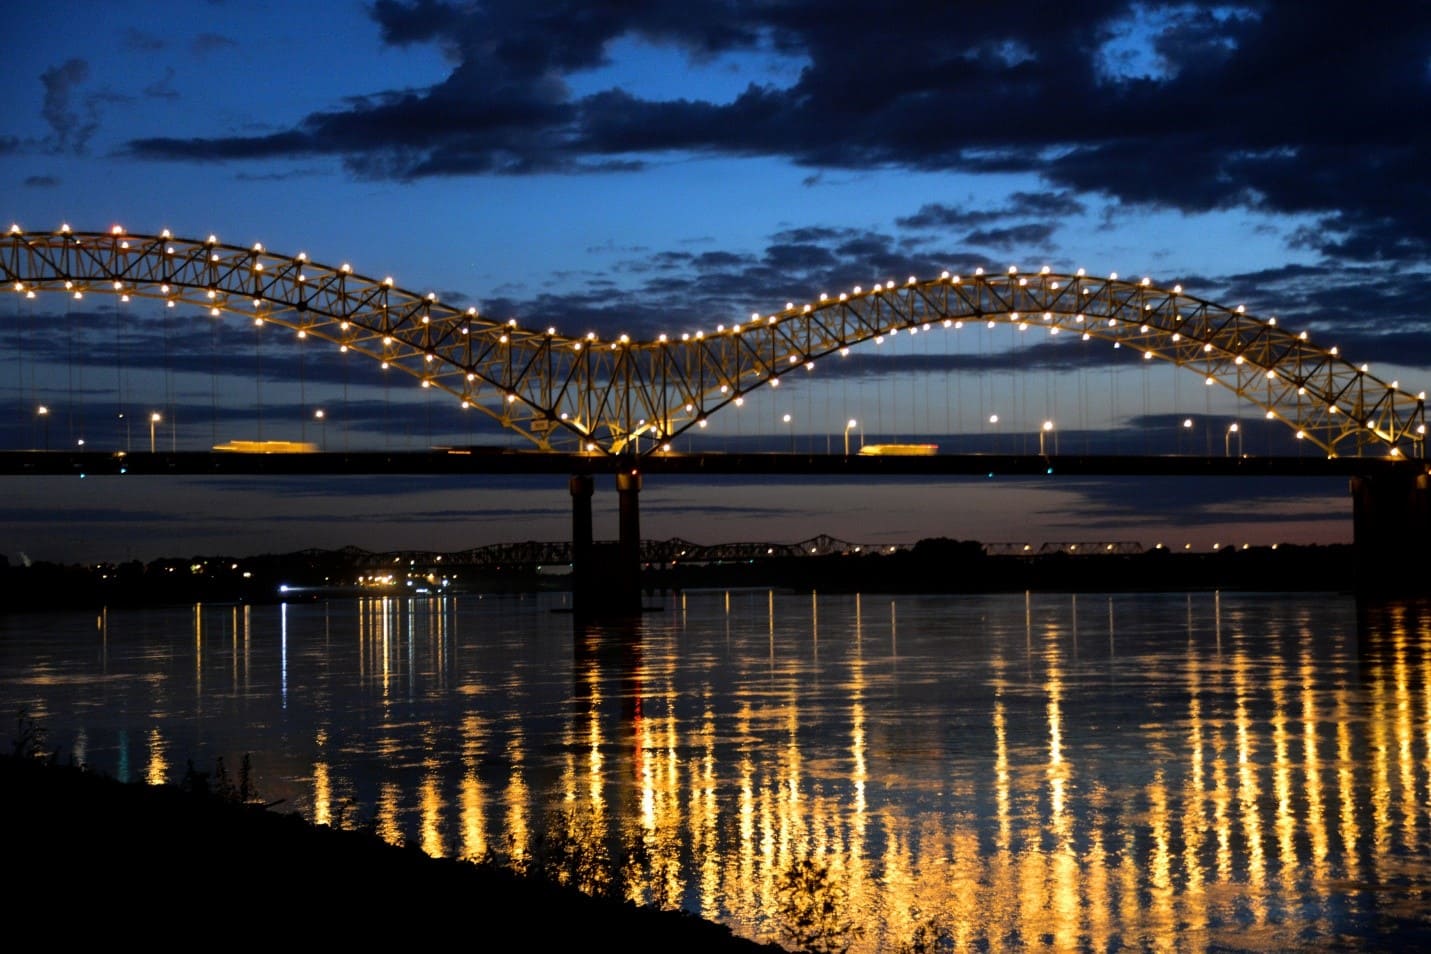 Travel Channel said Memphis is the hottest southern destination of 2019!